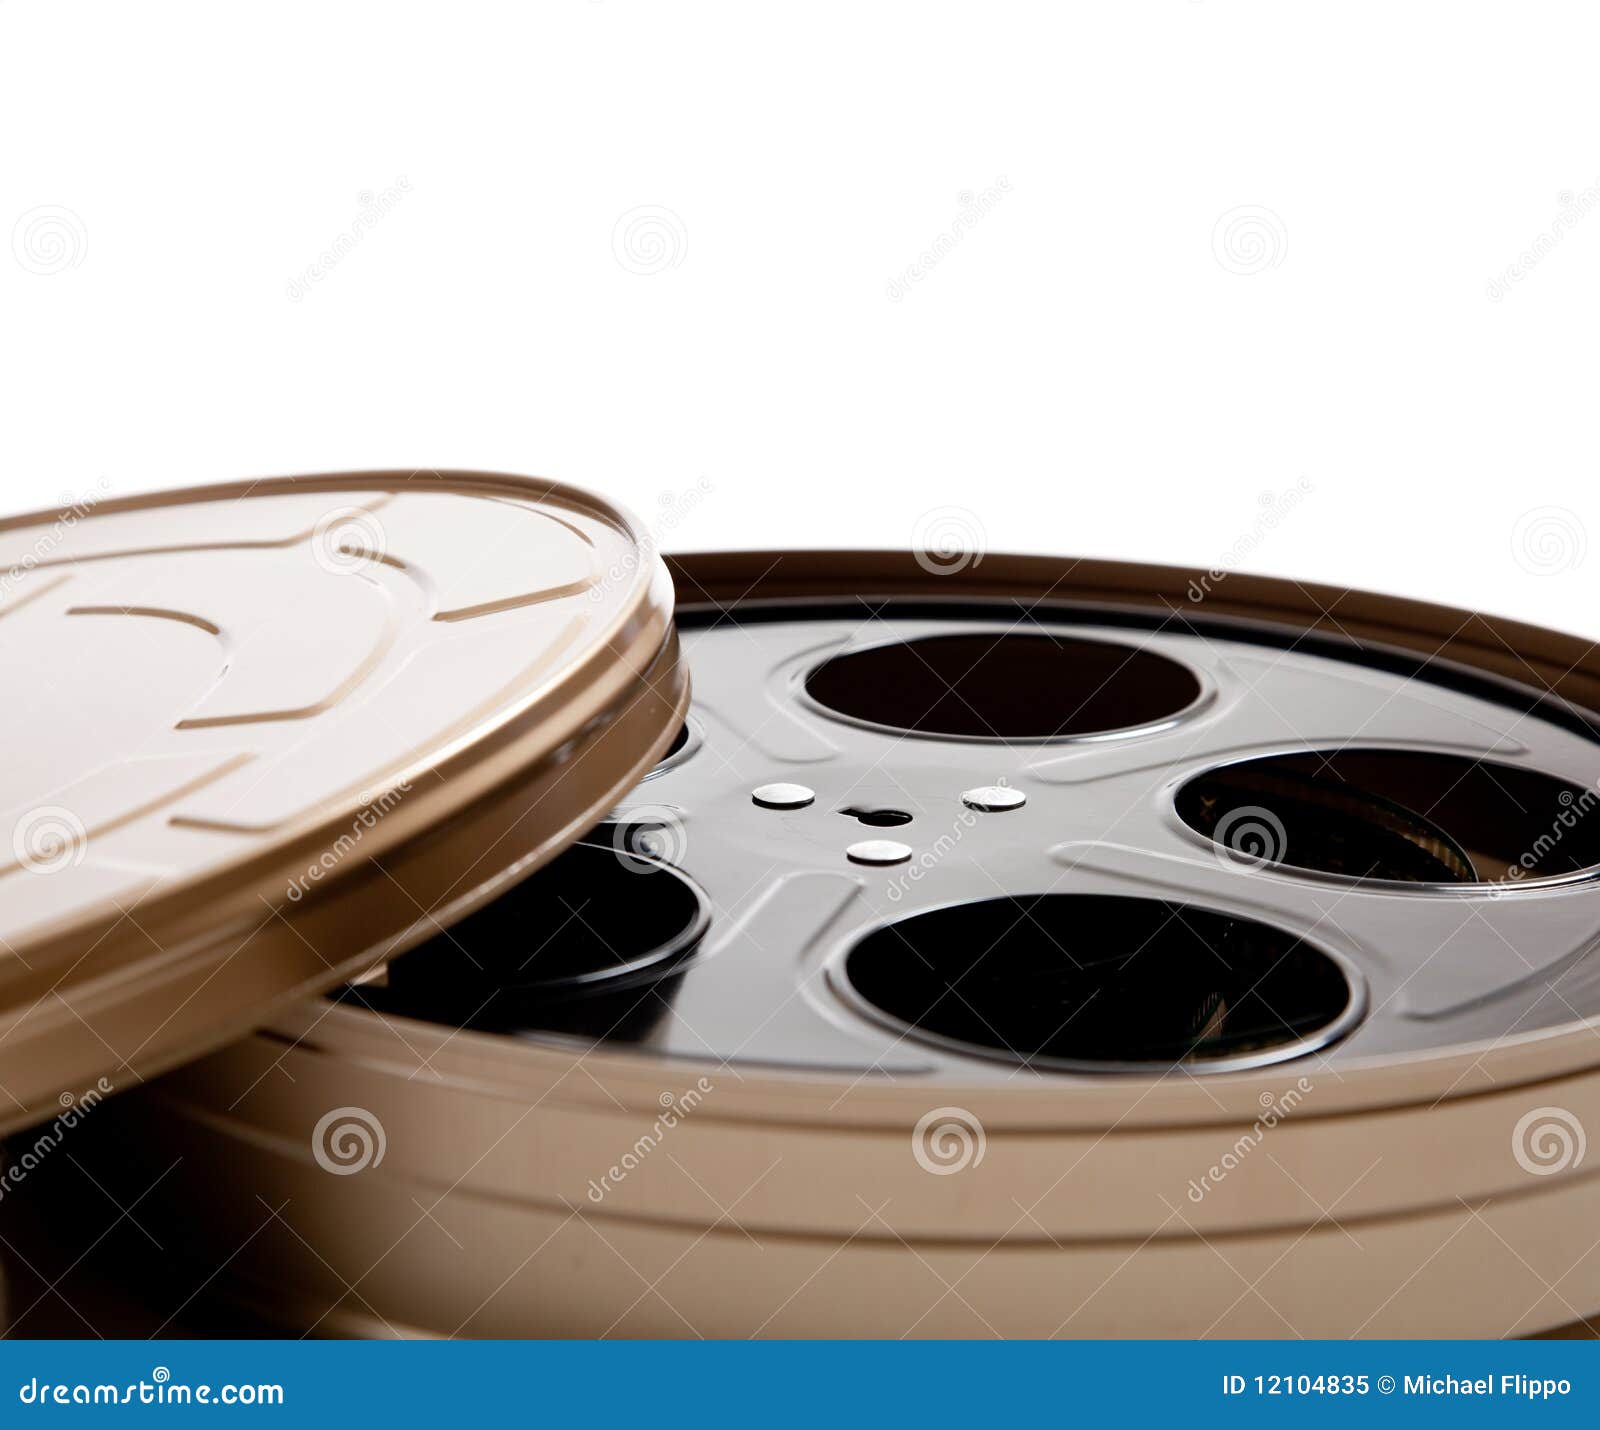 https://thumbs.dreamstime.com/z/movie-reel-canister-white-copy-space-12104835.jpg